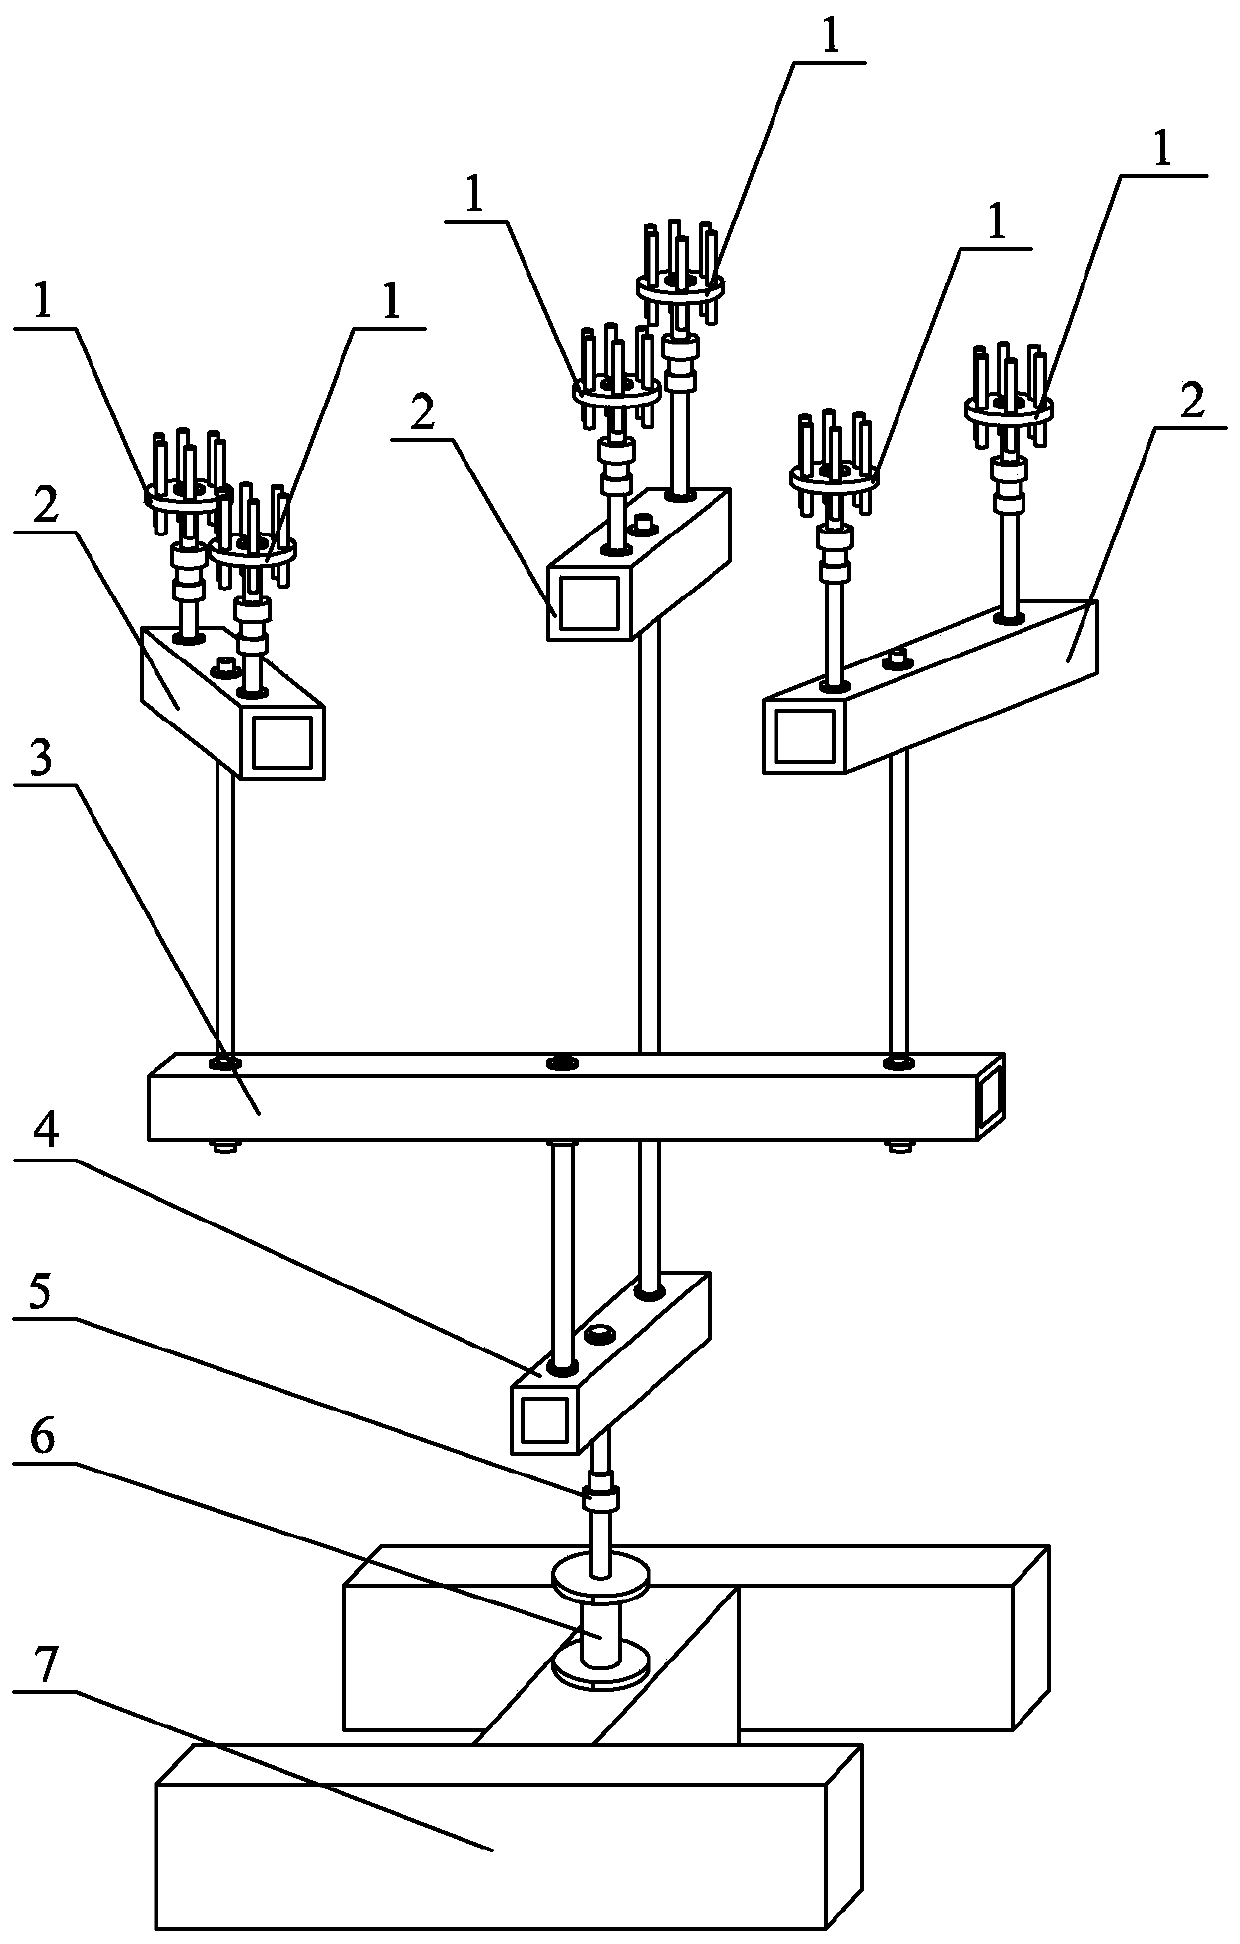 Distribution beam loading system for metal truss radome test and installation method